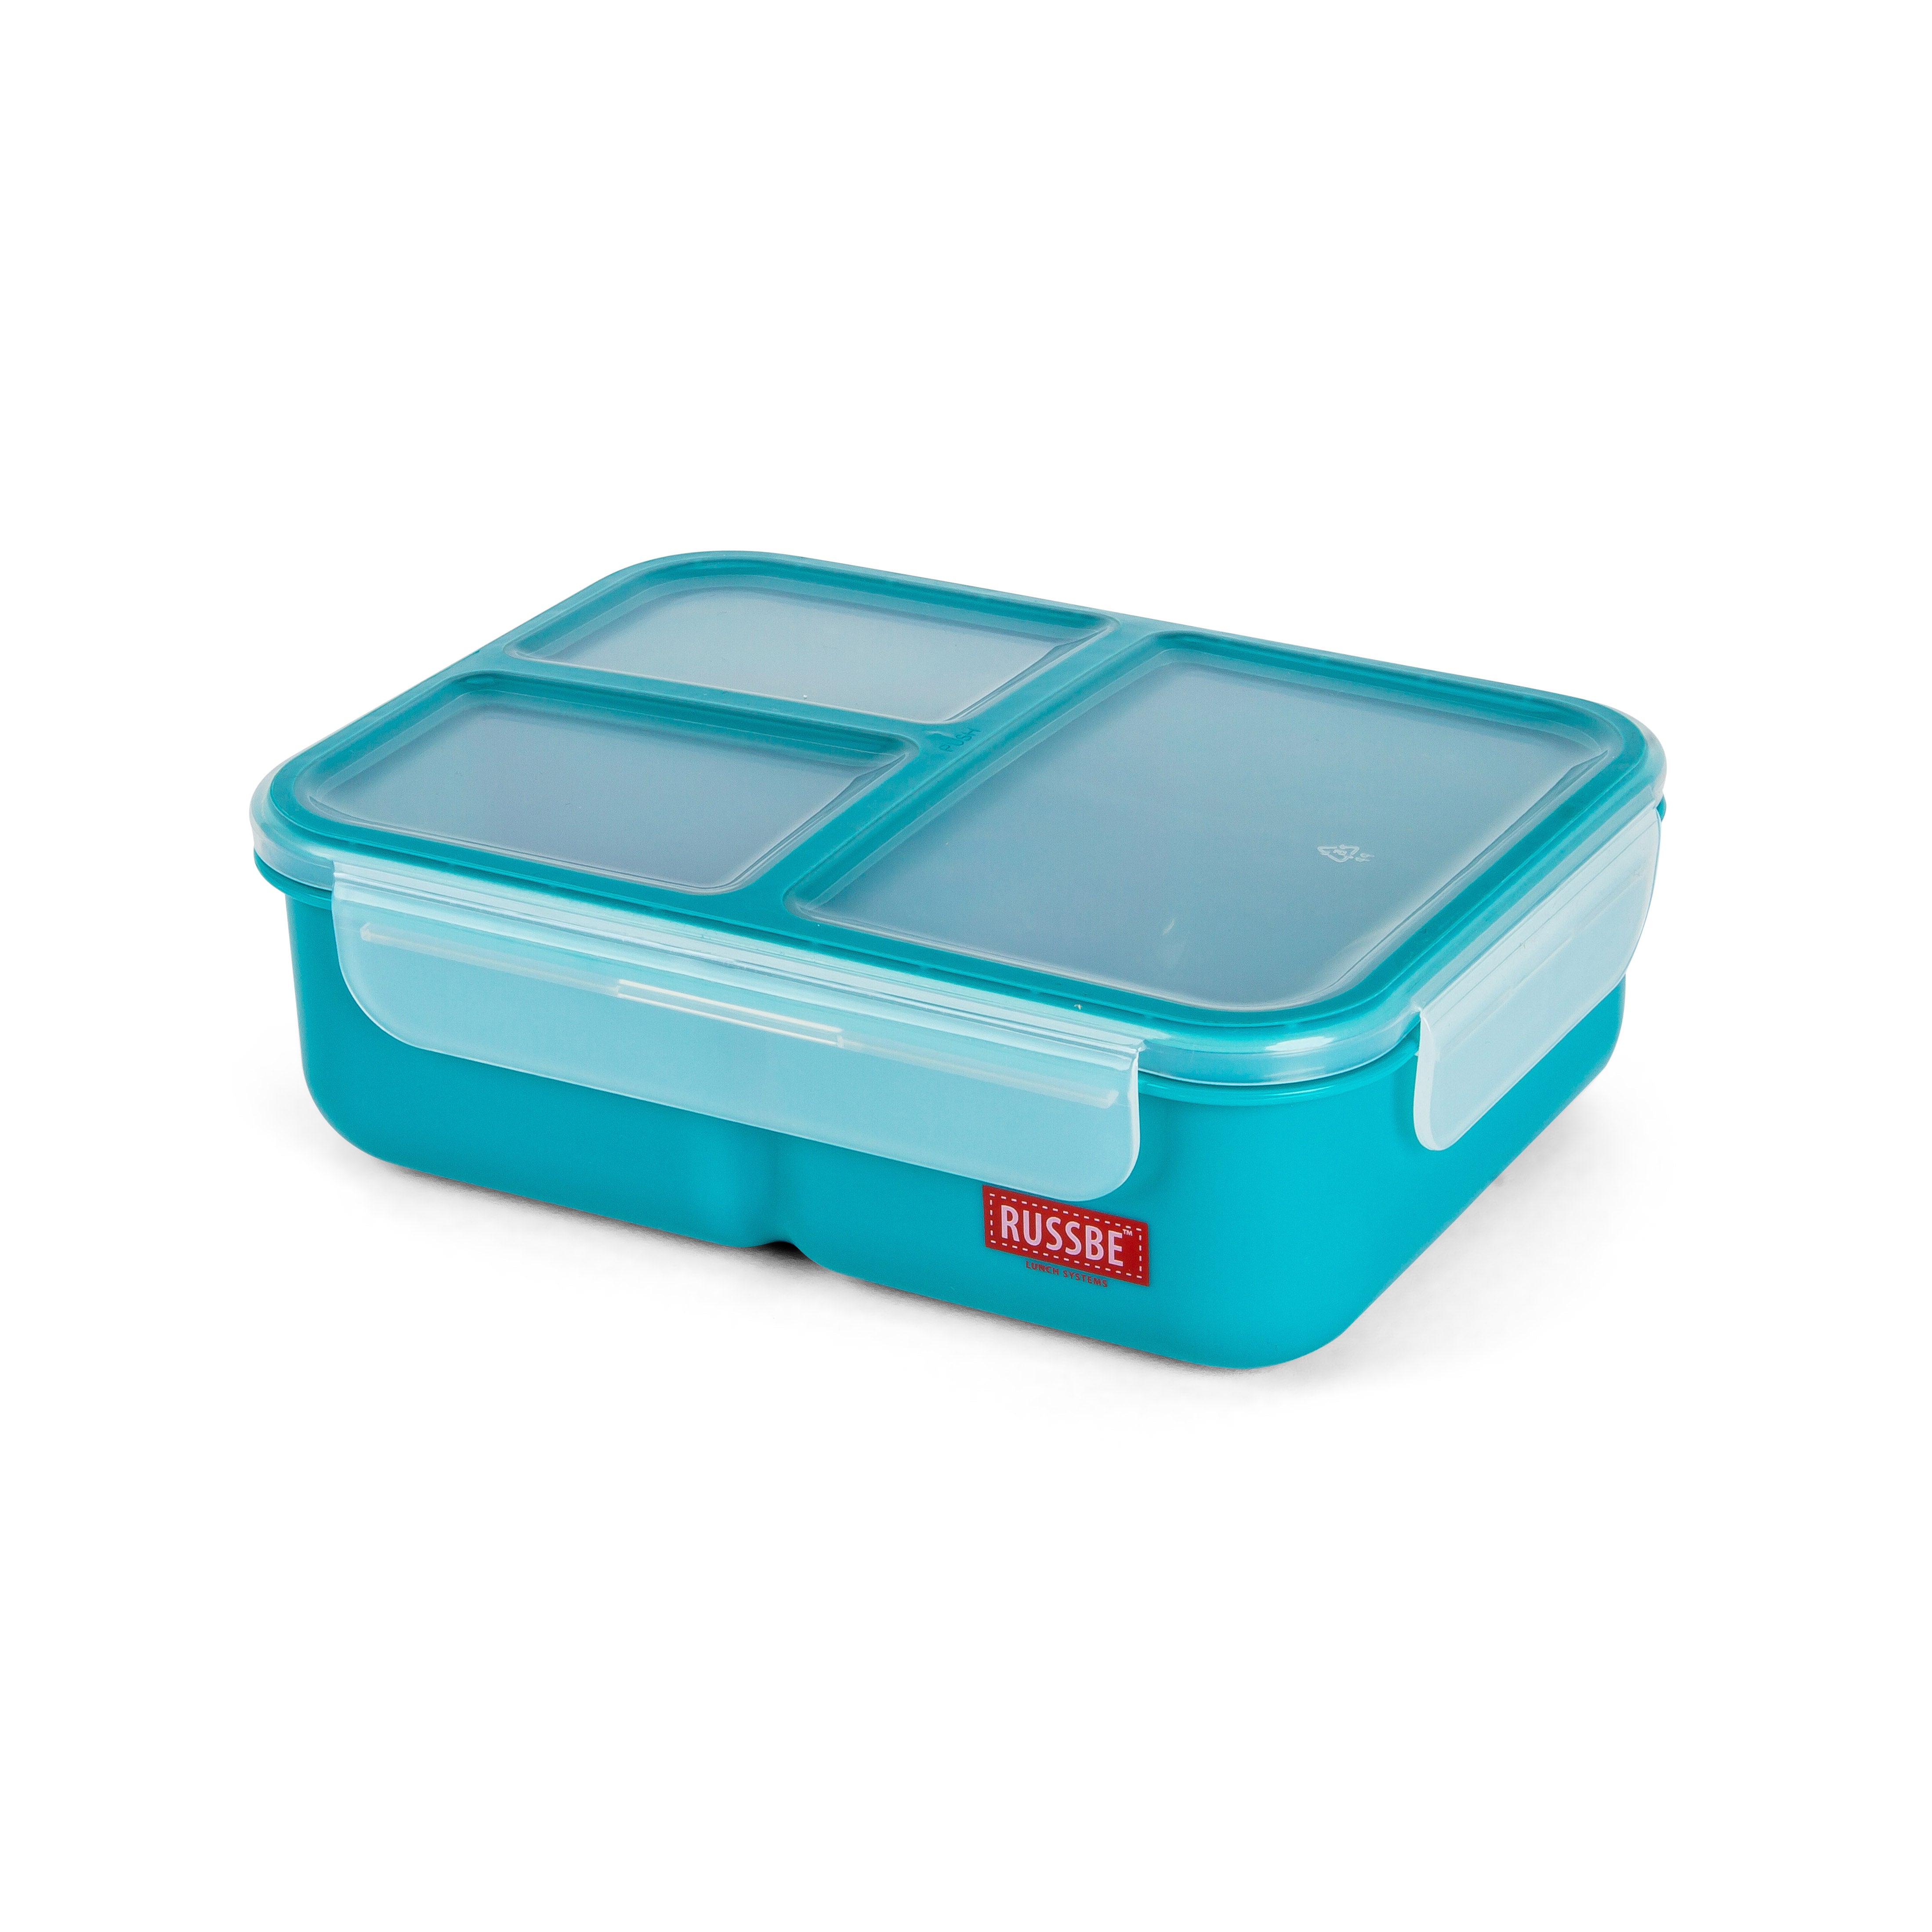 http://www.russbe.com/cdn/shop/products/Russbe_Lunch_Bento_5oz_Teal_A1_6b084b6a-e77b-4dc1-a013-a7d733afbeed.jpg?v=1617058346